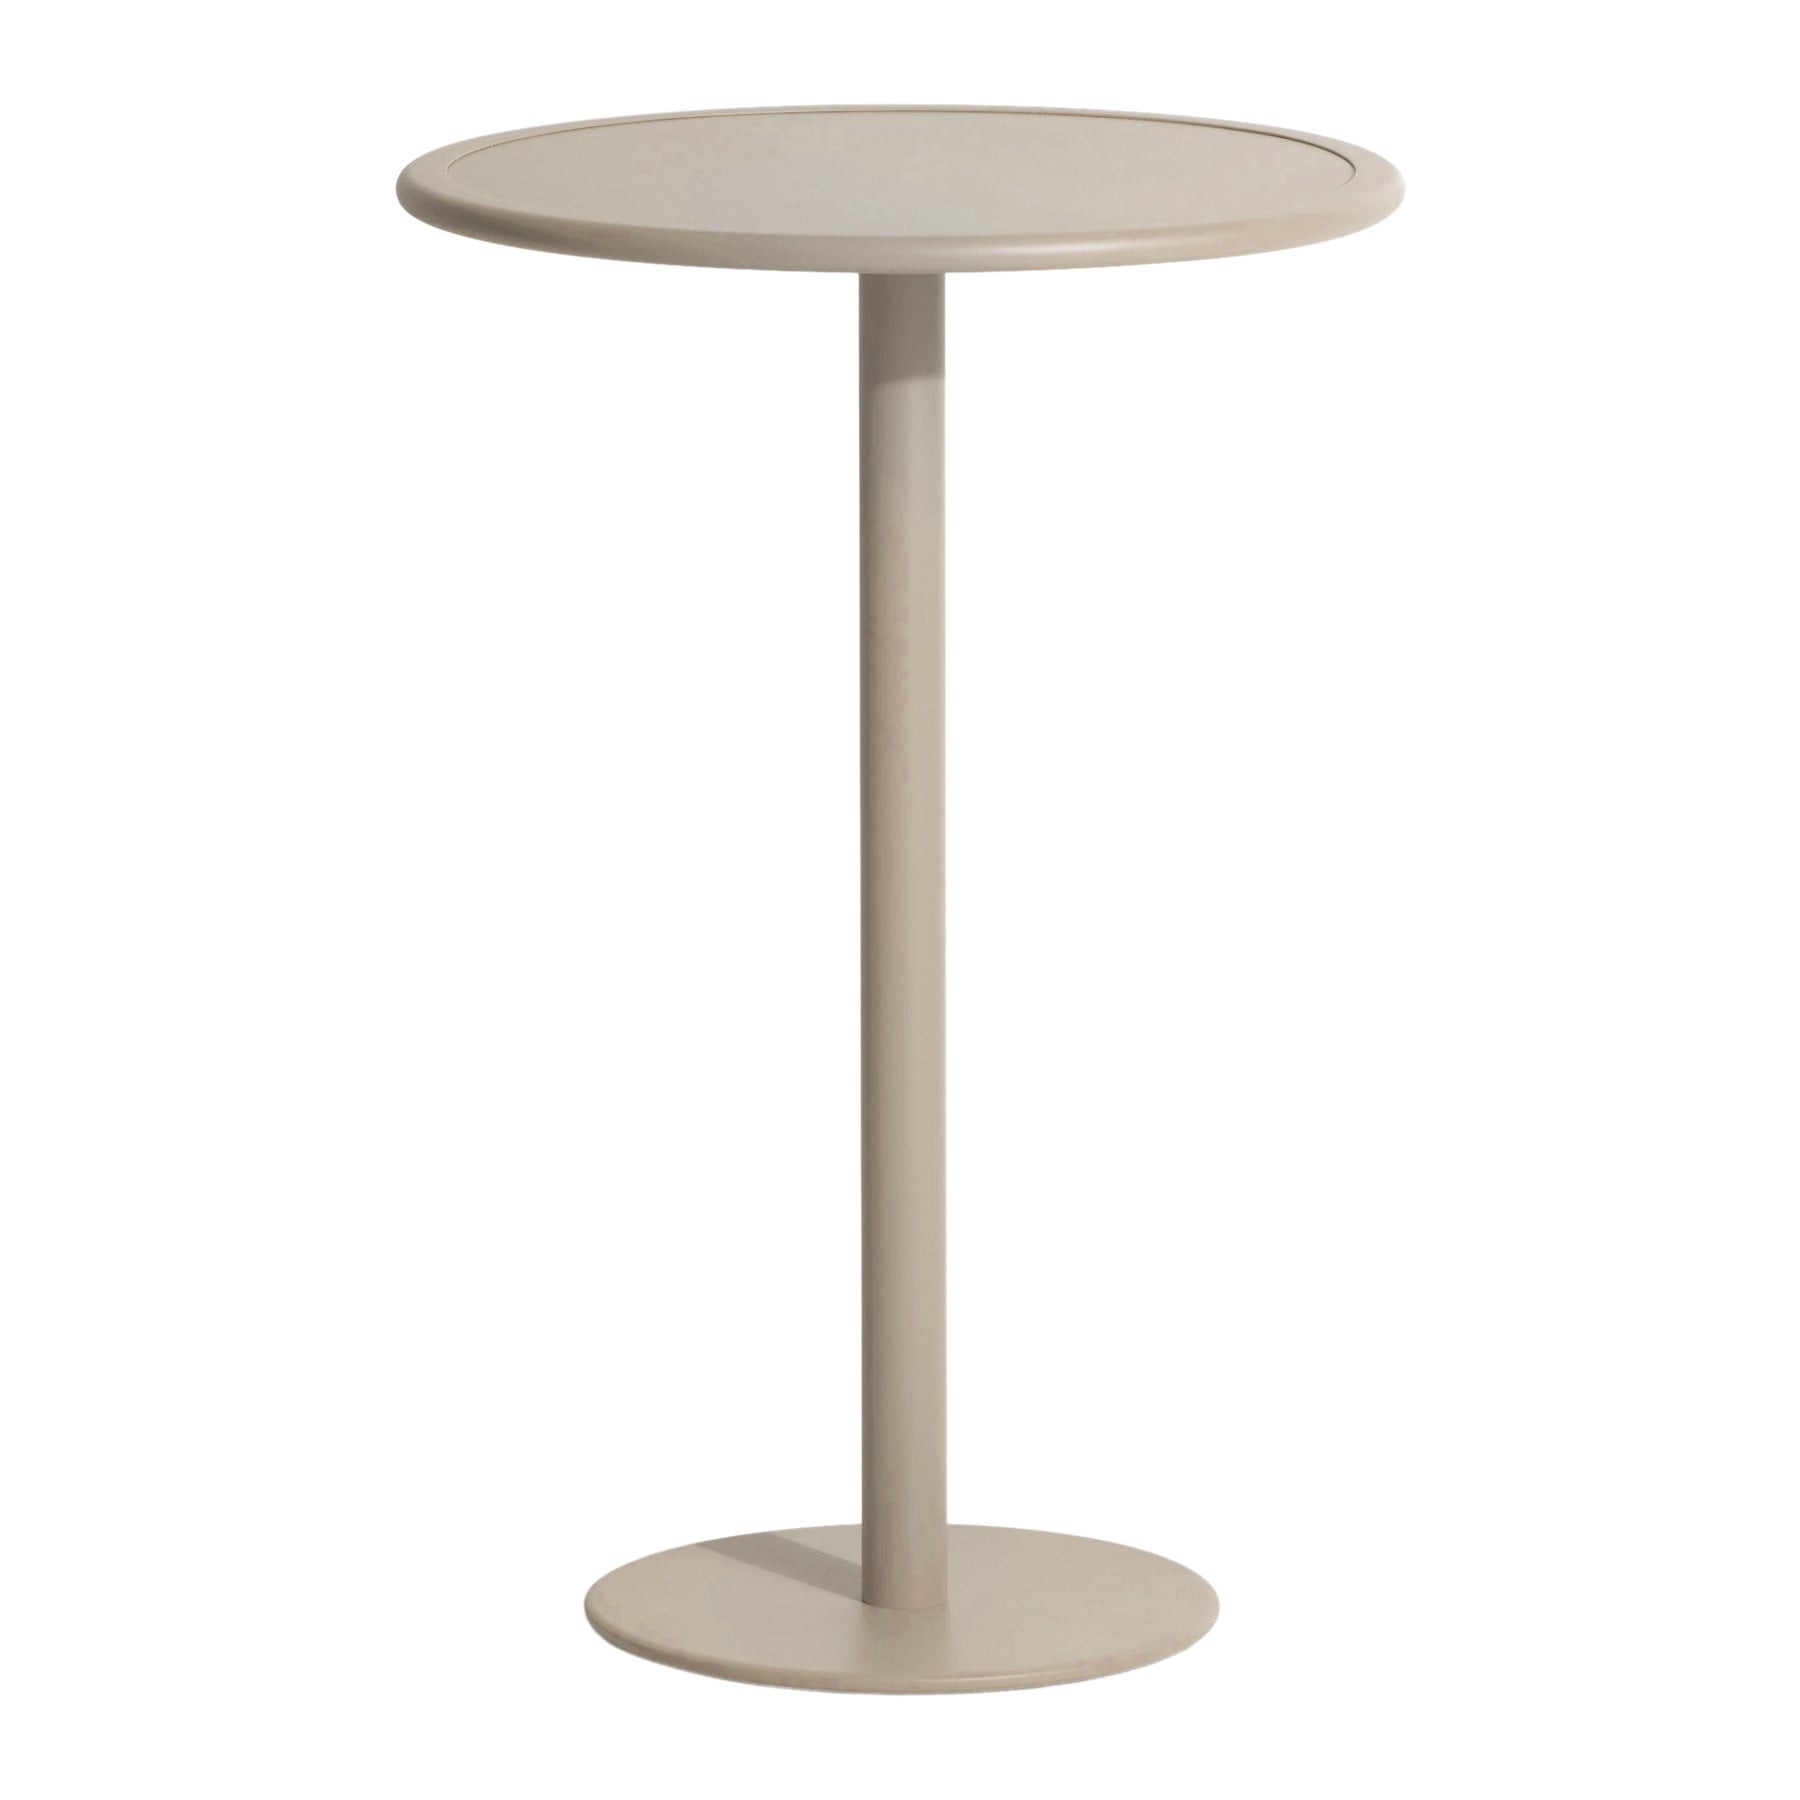 Petite Friture Week-End Round High Table in Dune Aluminium, 2017 For Sale